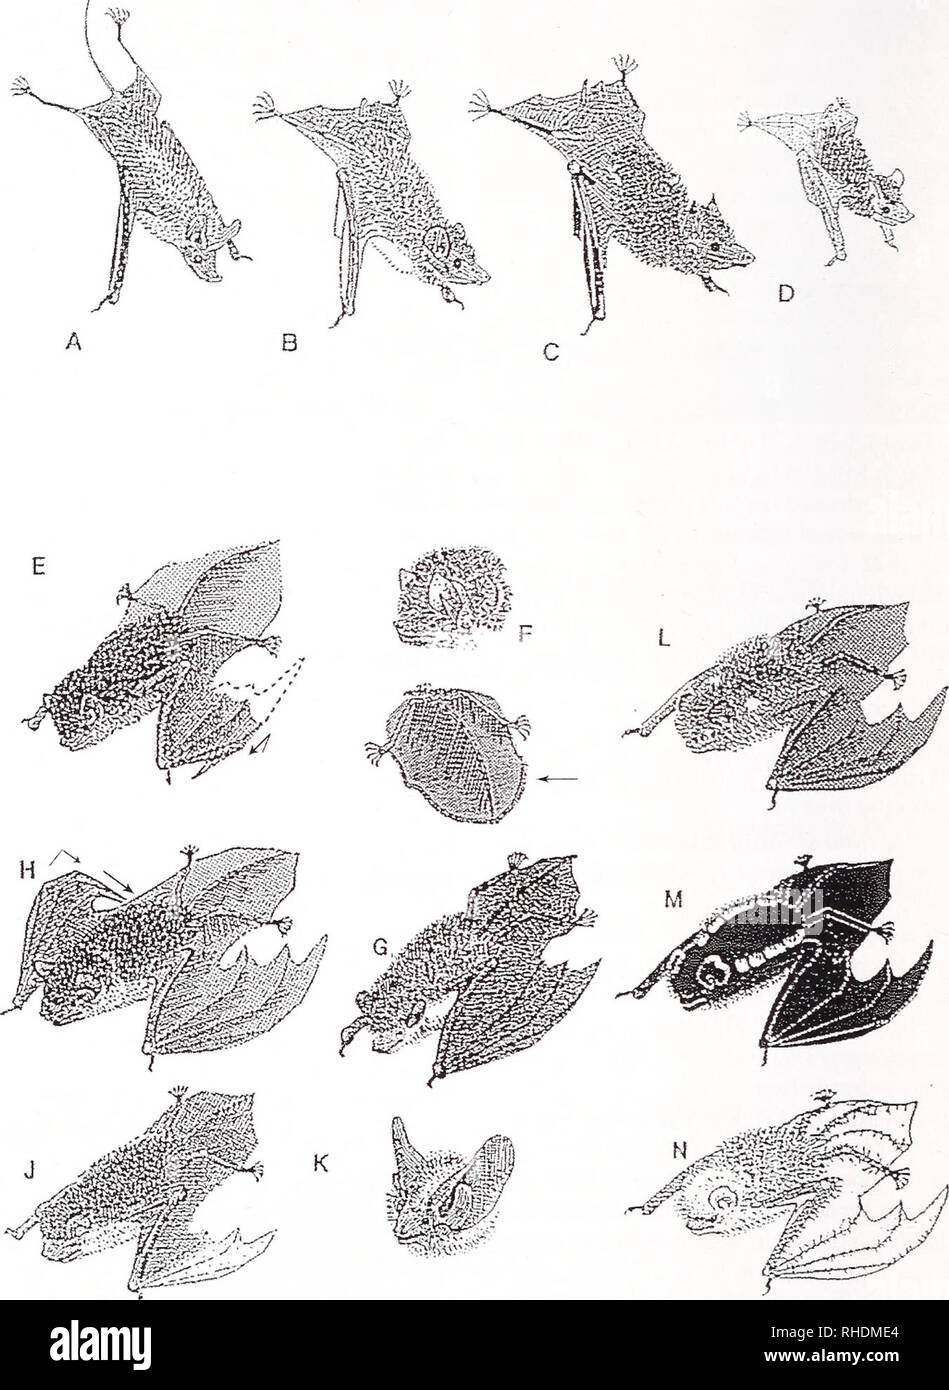 . Bonner zoologische Monographien. Zoology. BONNER ZOOLOGISCHE MONOGRAPHIEN Nr. 55/2009. FIG. 23. Rhinopomatidae: K — Rhinopoma. Emballonuridae: B - Taphozous mauritianus; C - Taphozous nudi- ventris; D - Coleura afra. Vespertilionidae: E - Miniopterus; F - Kerivoula lanosa; G — Nycticeinops schlieffeni; Fi - Scotophilus; J - Mimetilliis; K - Laephotis wintoni L - Glanconycteris humeralis; M - Glauconycteris ege- ria ssp. (?); N - Glauconycteris gleni. 38. Please note that these images are extracted from scanned page images that may have been digitally enhanced for readability - coloration an Stock Photo